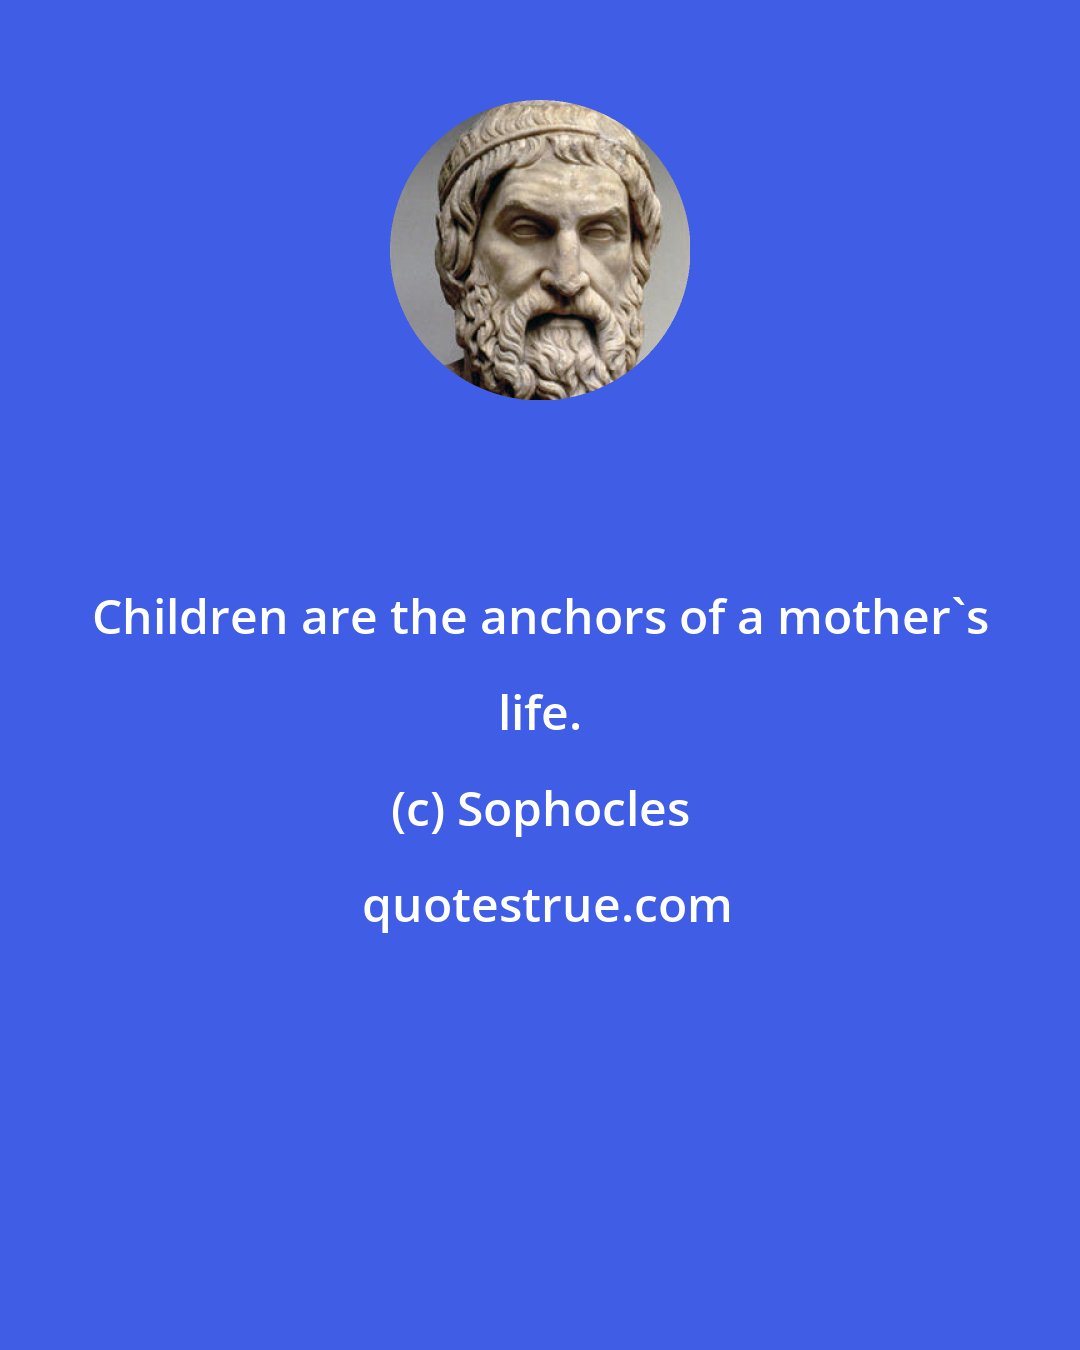 Sophocles: Children are the anchors of a mother's life.